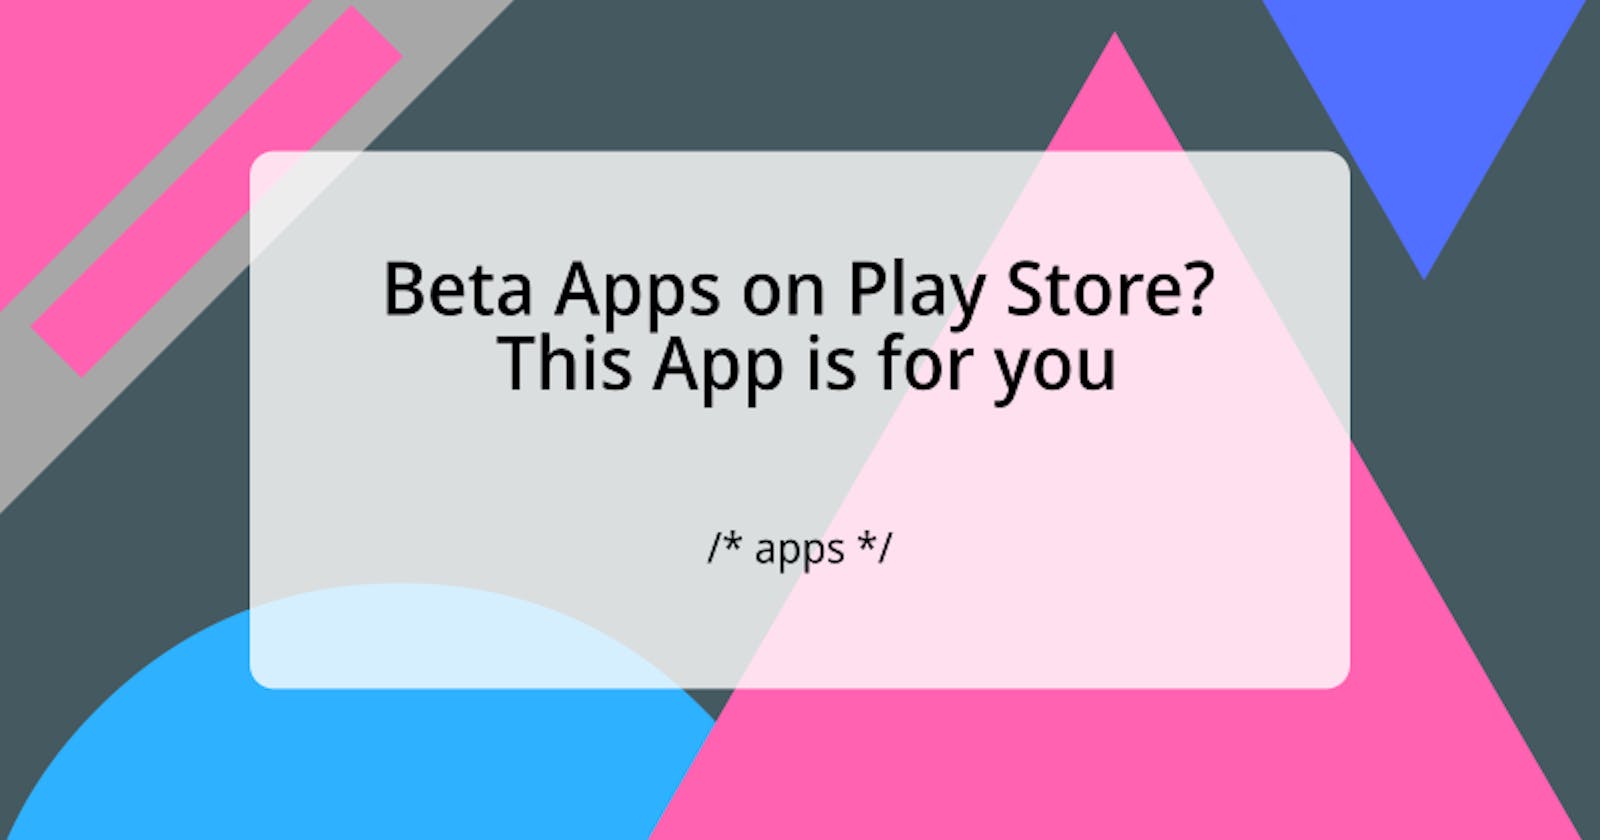 Interesting in Beta Apps on Play Store? This App is for you